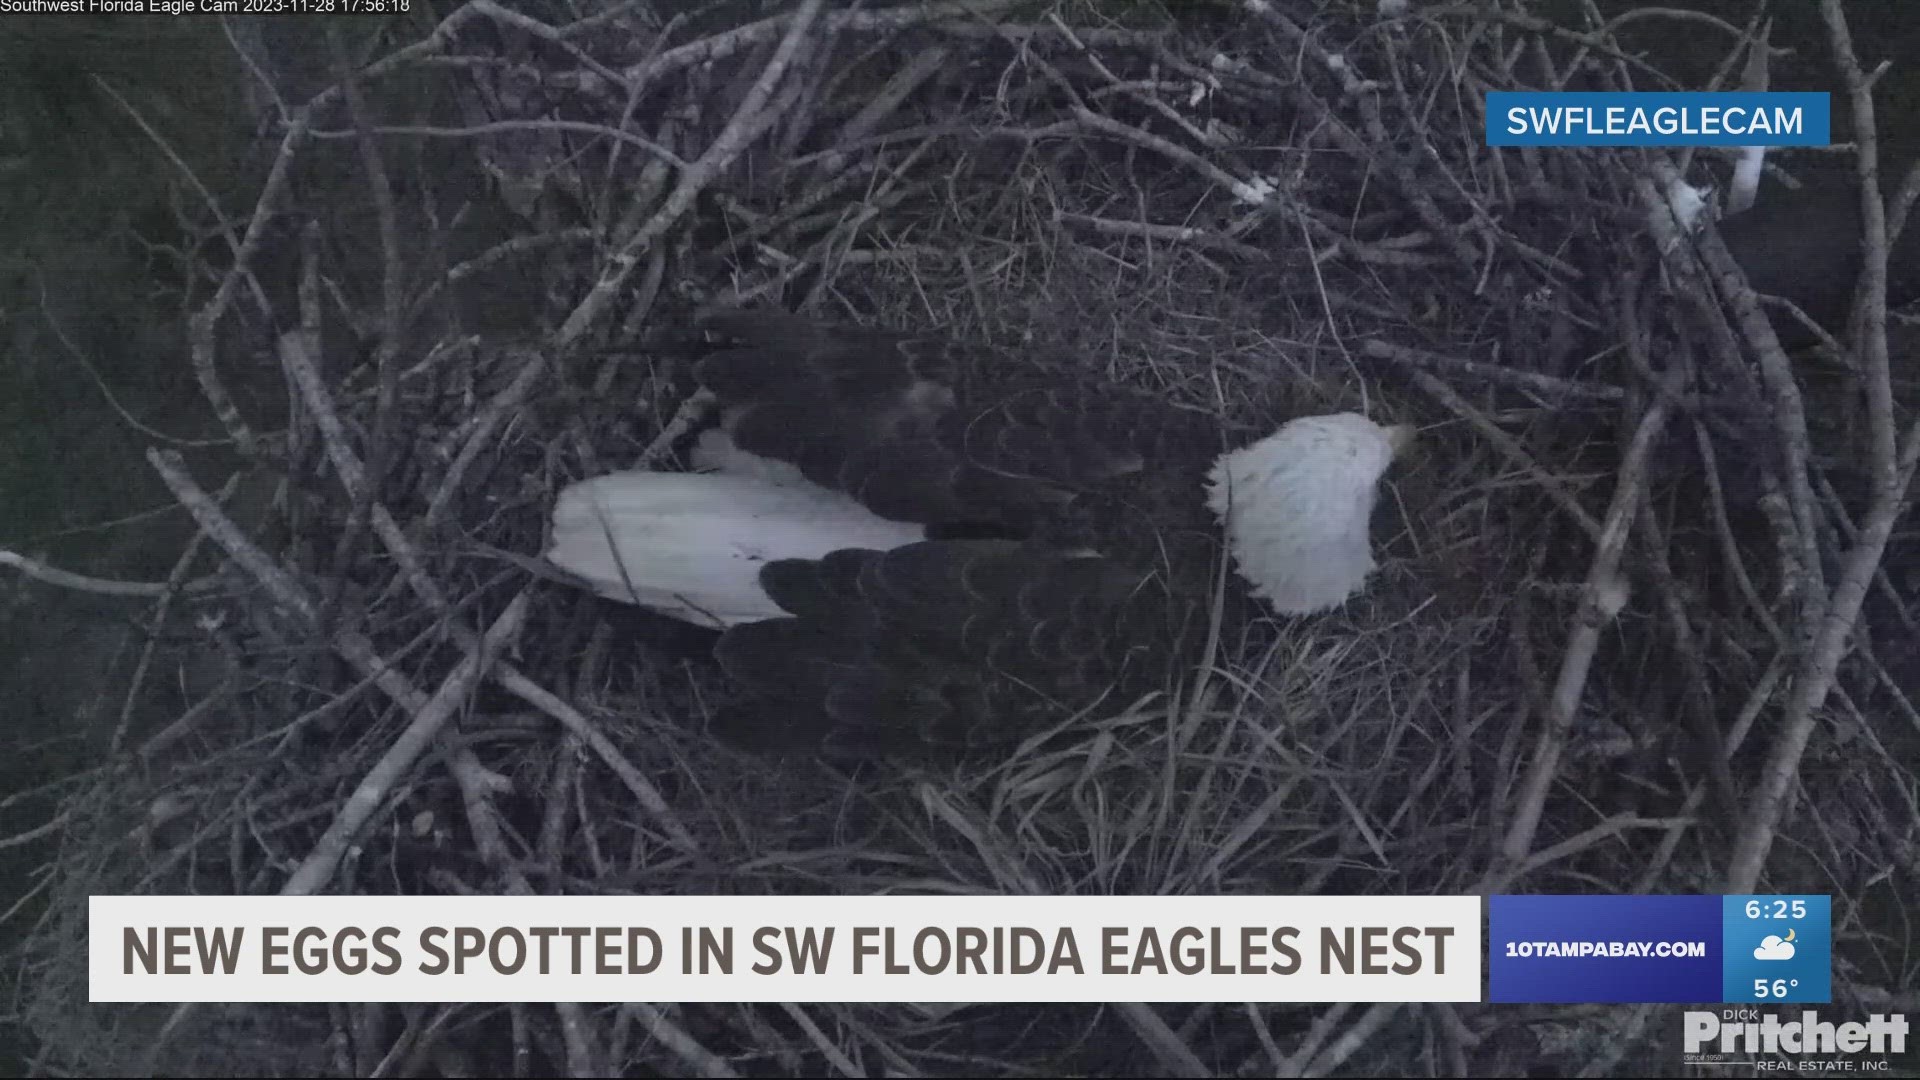 The popular eagle cam first reported an egg in the nest back on Friday. The two birds have been taking turns on egg duty.